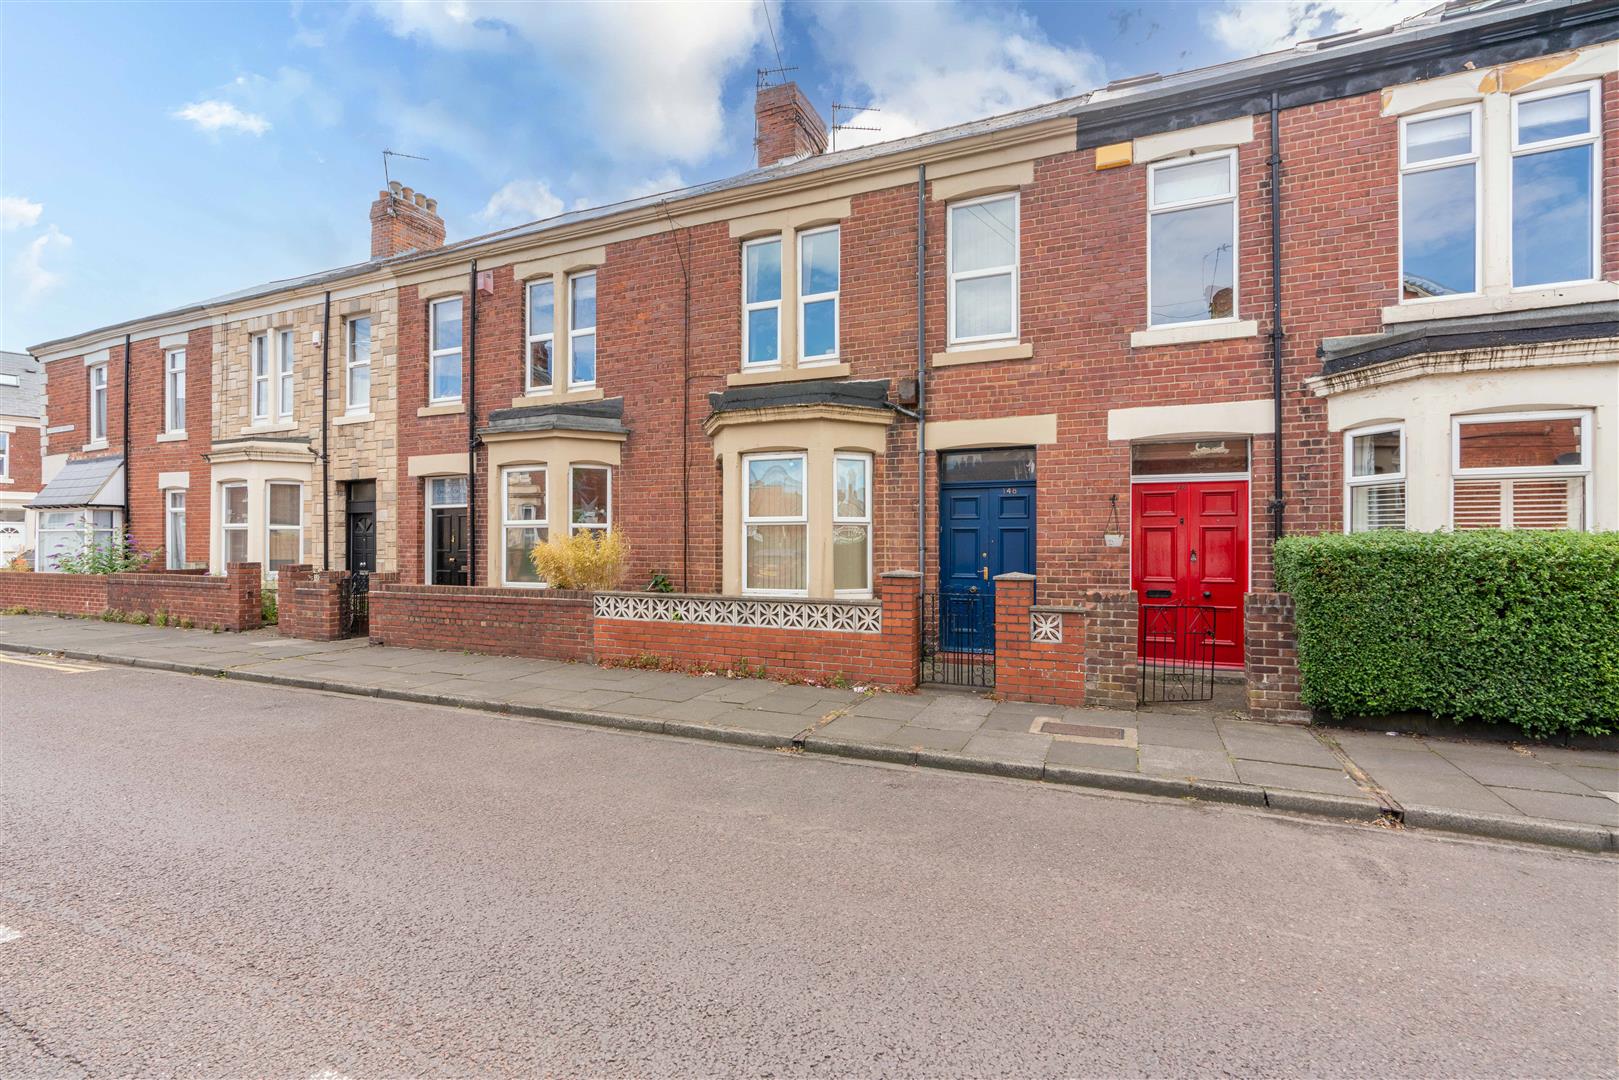 4 bed terraced house for sale in Cardigan Terrace, Newcastle Upon Tyne, NE6 